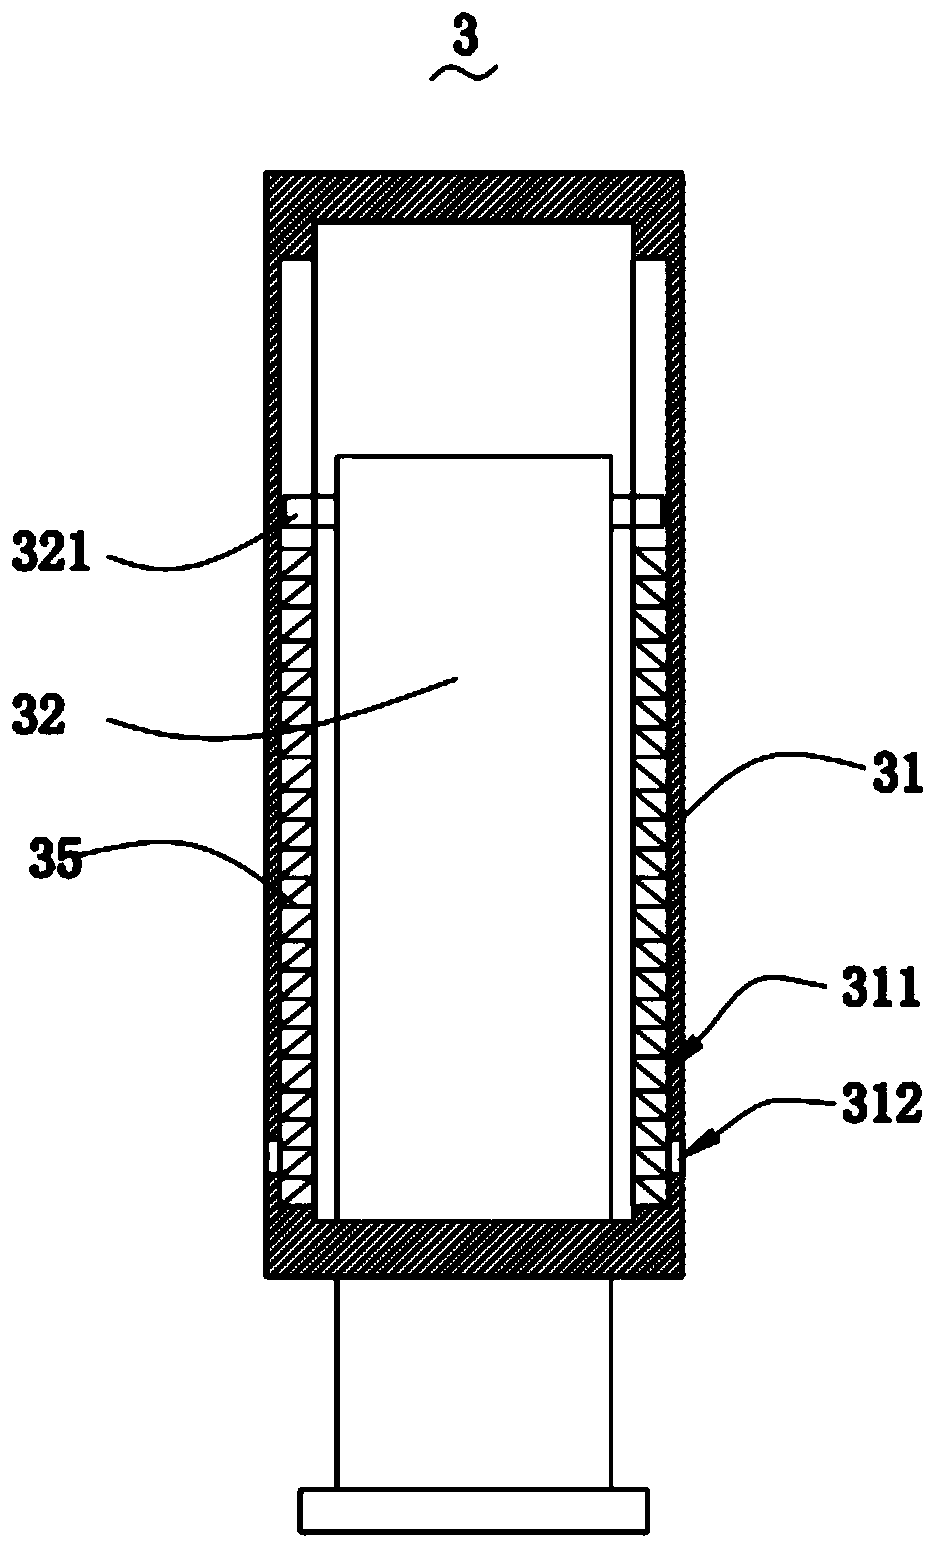 Self-moving sediment gap water collecting device